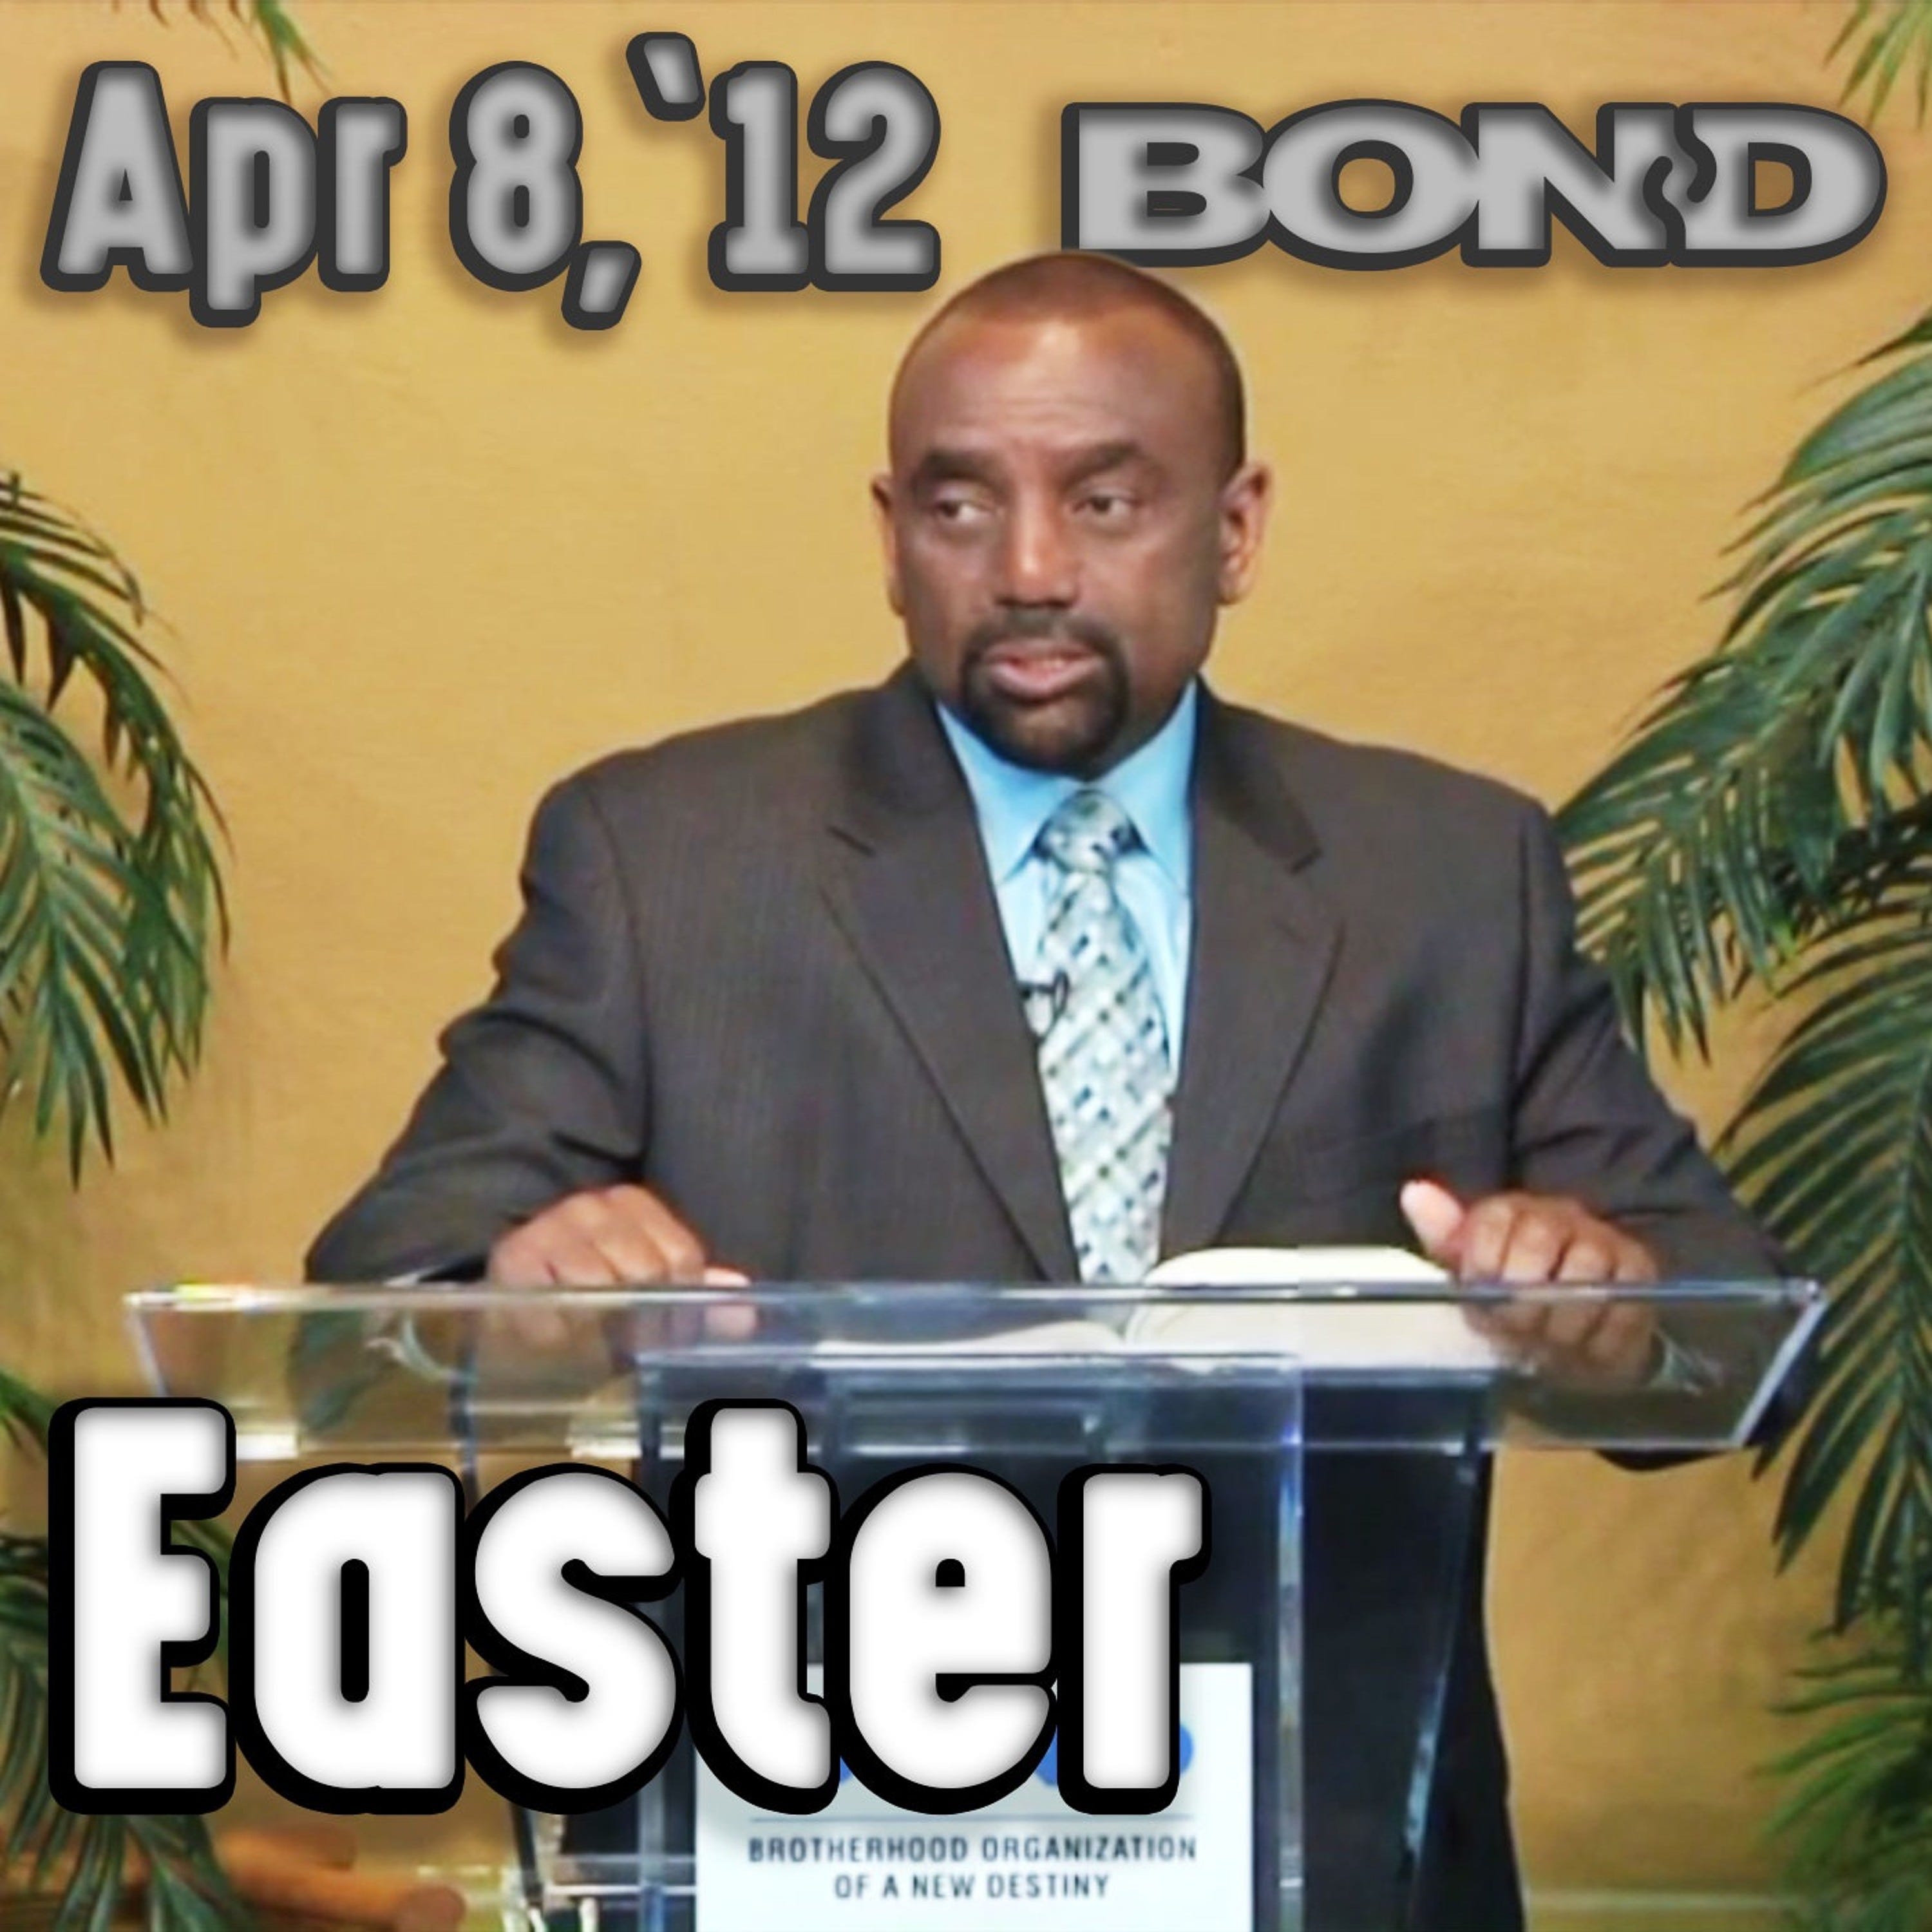 04/08/12 Special Easter Service (Archive)